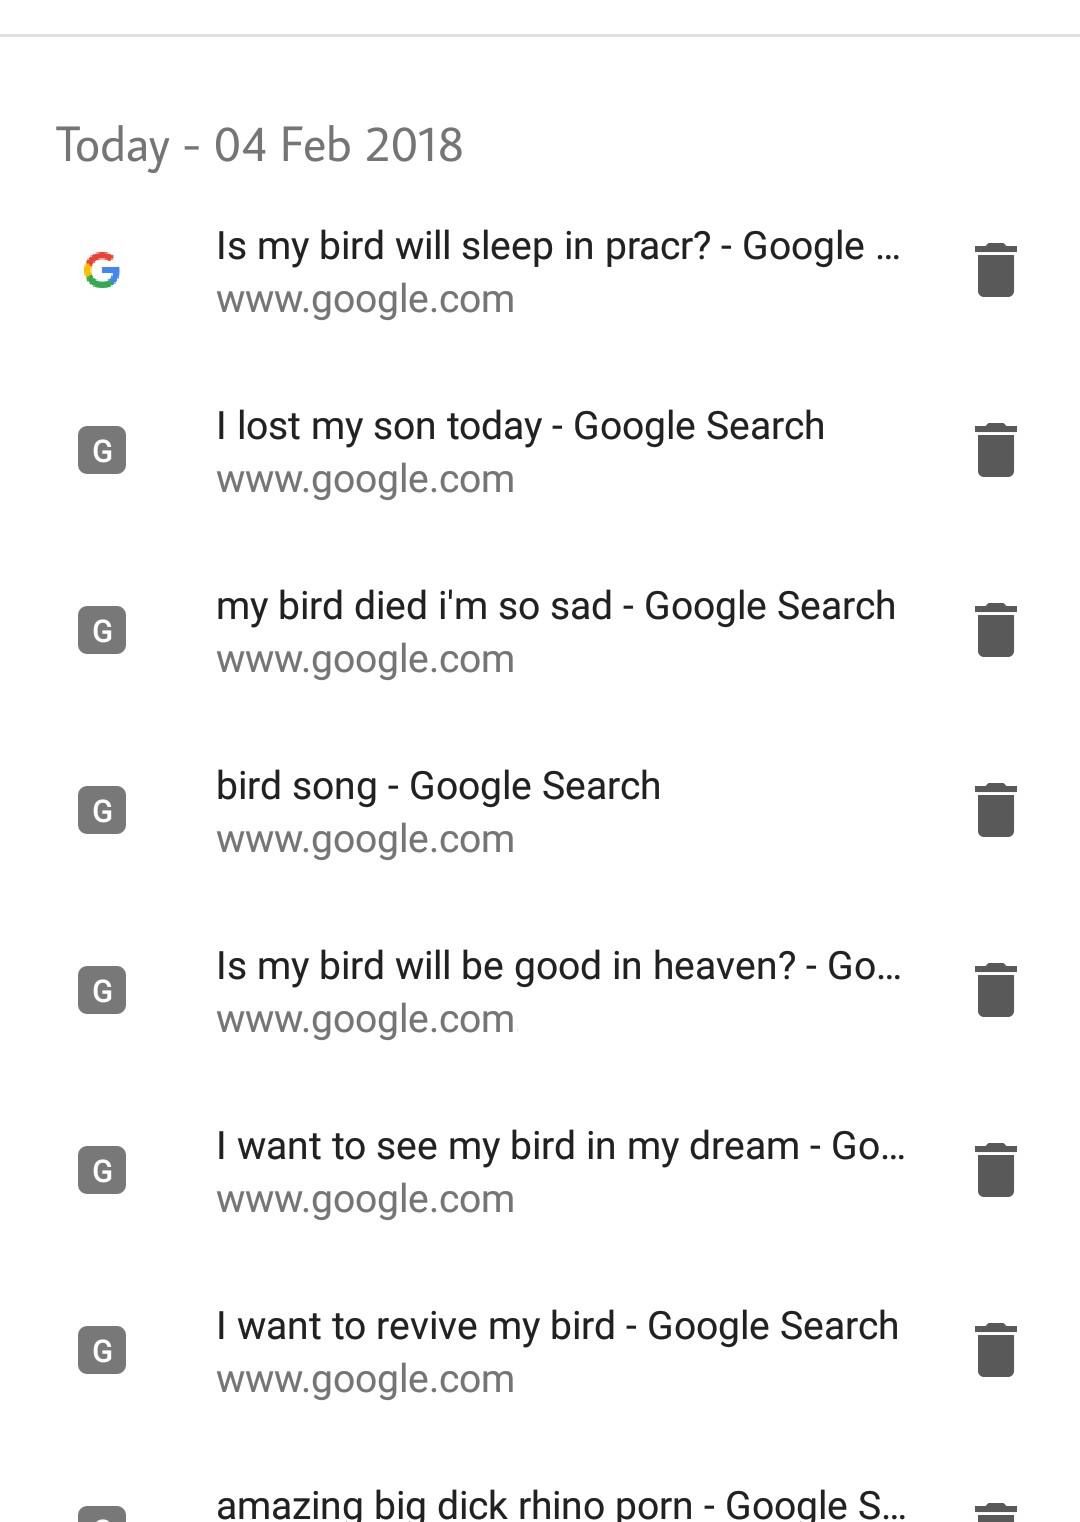 My brother's bird died this morning. I saw his google history. So sad...